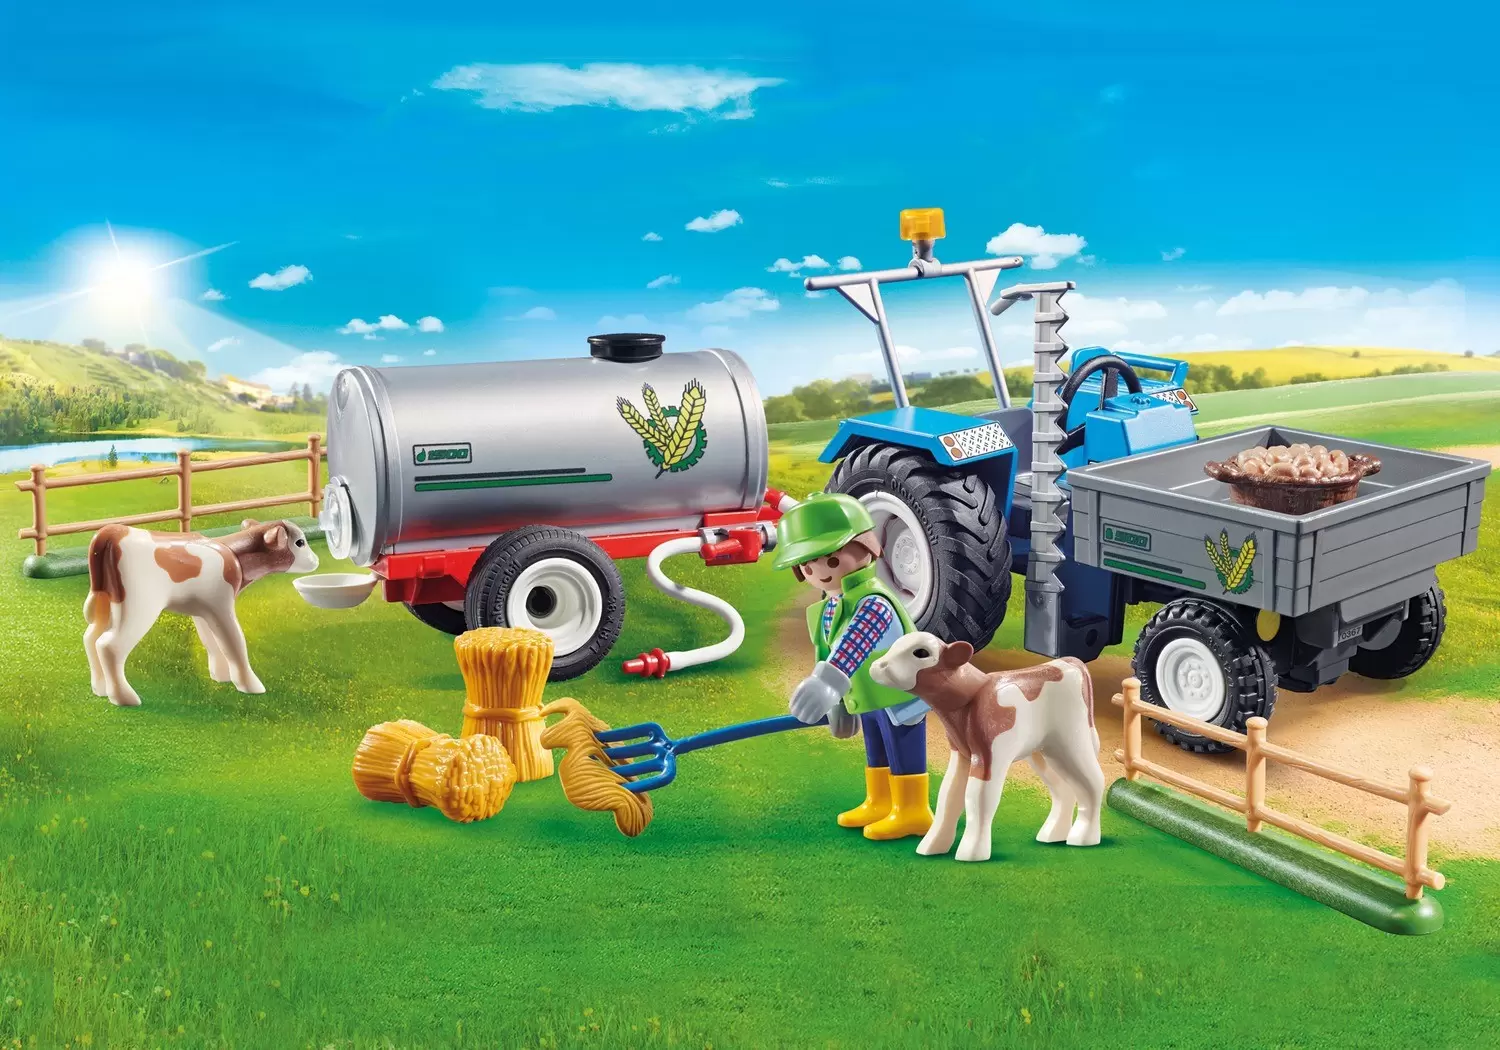 Playmobil Country Ferme 71248